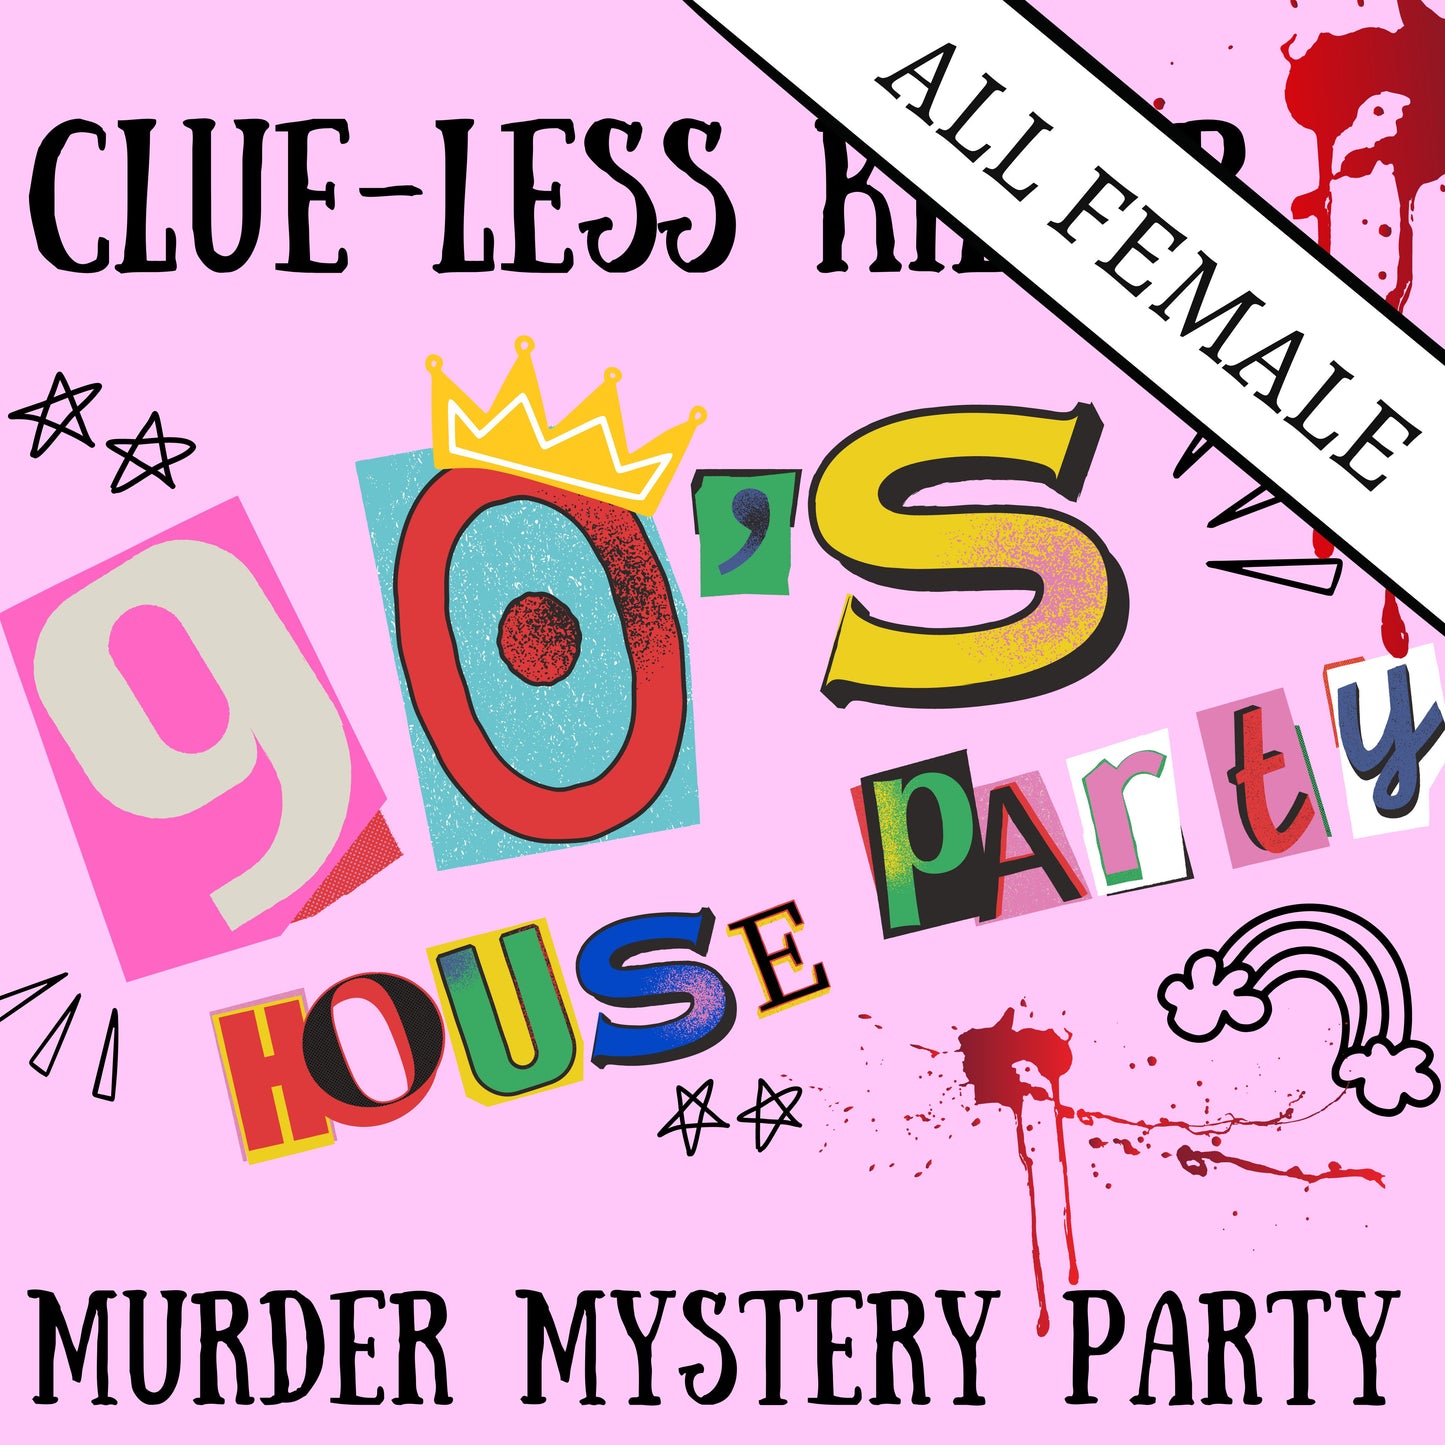 Fun and colourful fully scripted 90s house party themed murder mystery party game for 5-10 players All Female